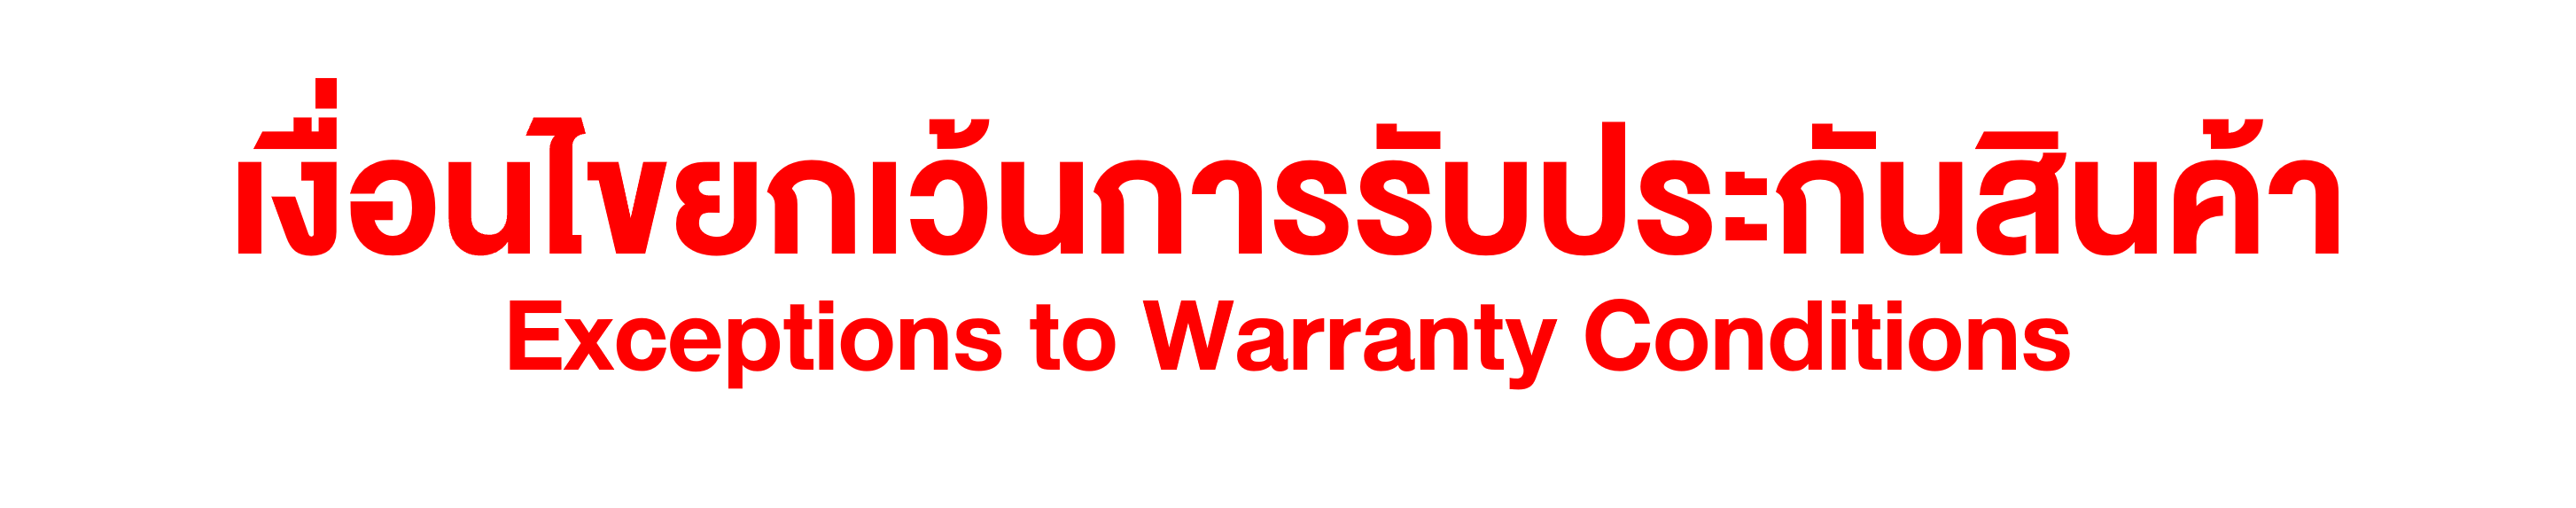 Exceptions to Warranty Conditions.png